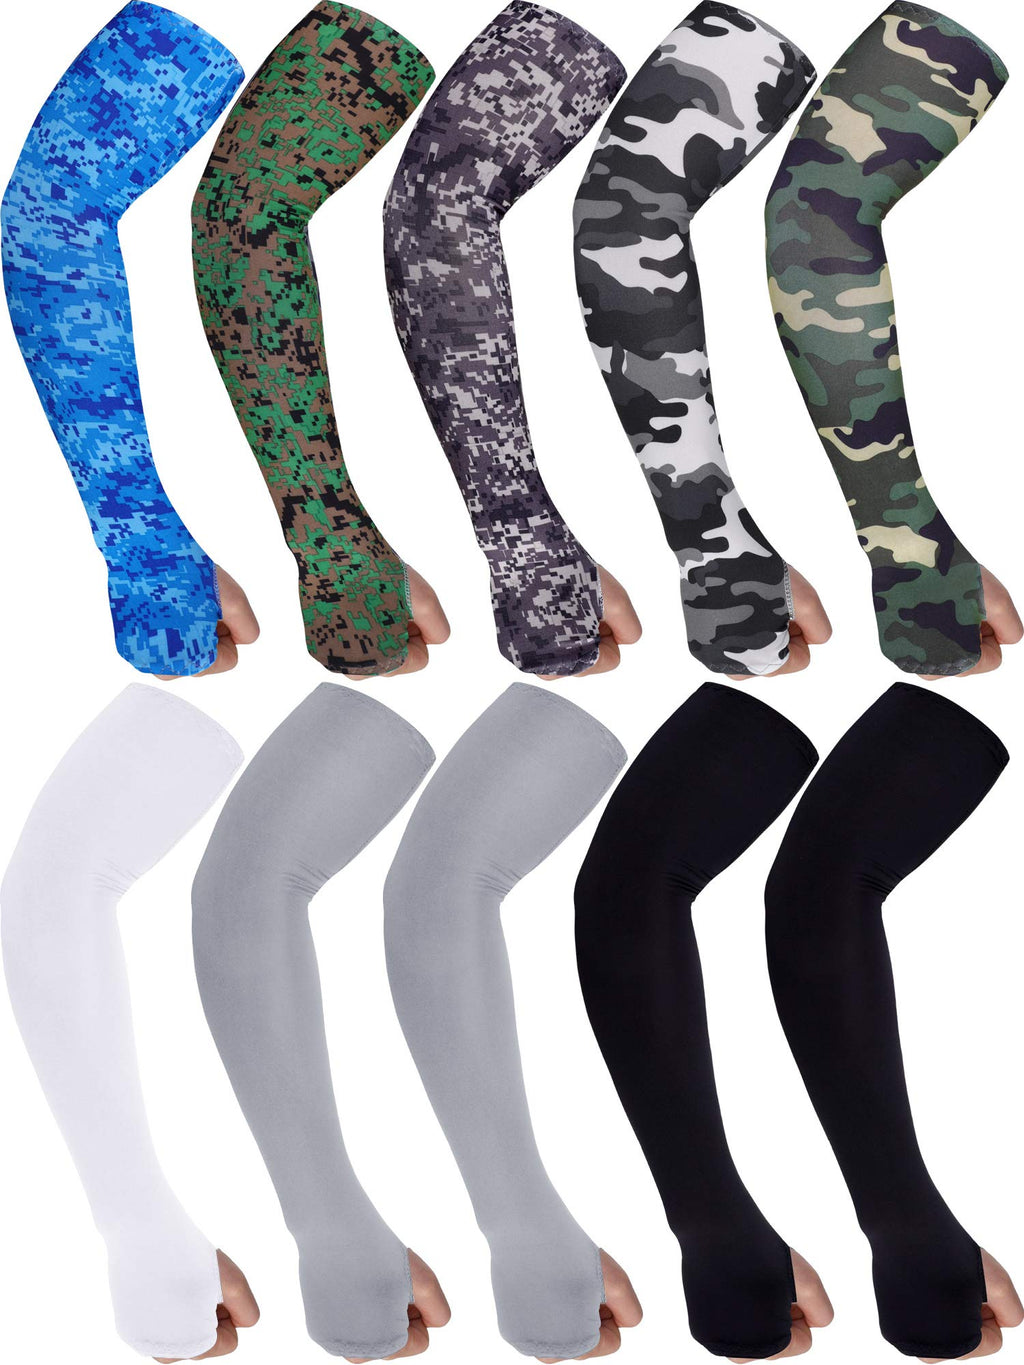  [AUSTRALIA] - 10 Pairs Men's Cooling Arm Sleeves Long Fingerless Gloves Anti Slip Sun Protection Arm Sleeves Black, Gray, White and Mixed Camo